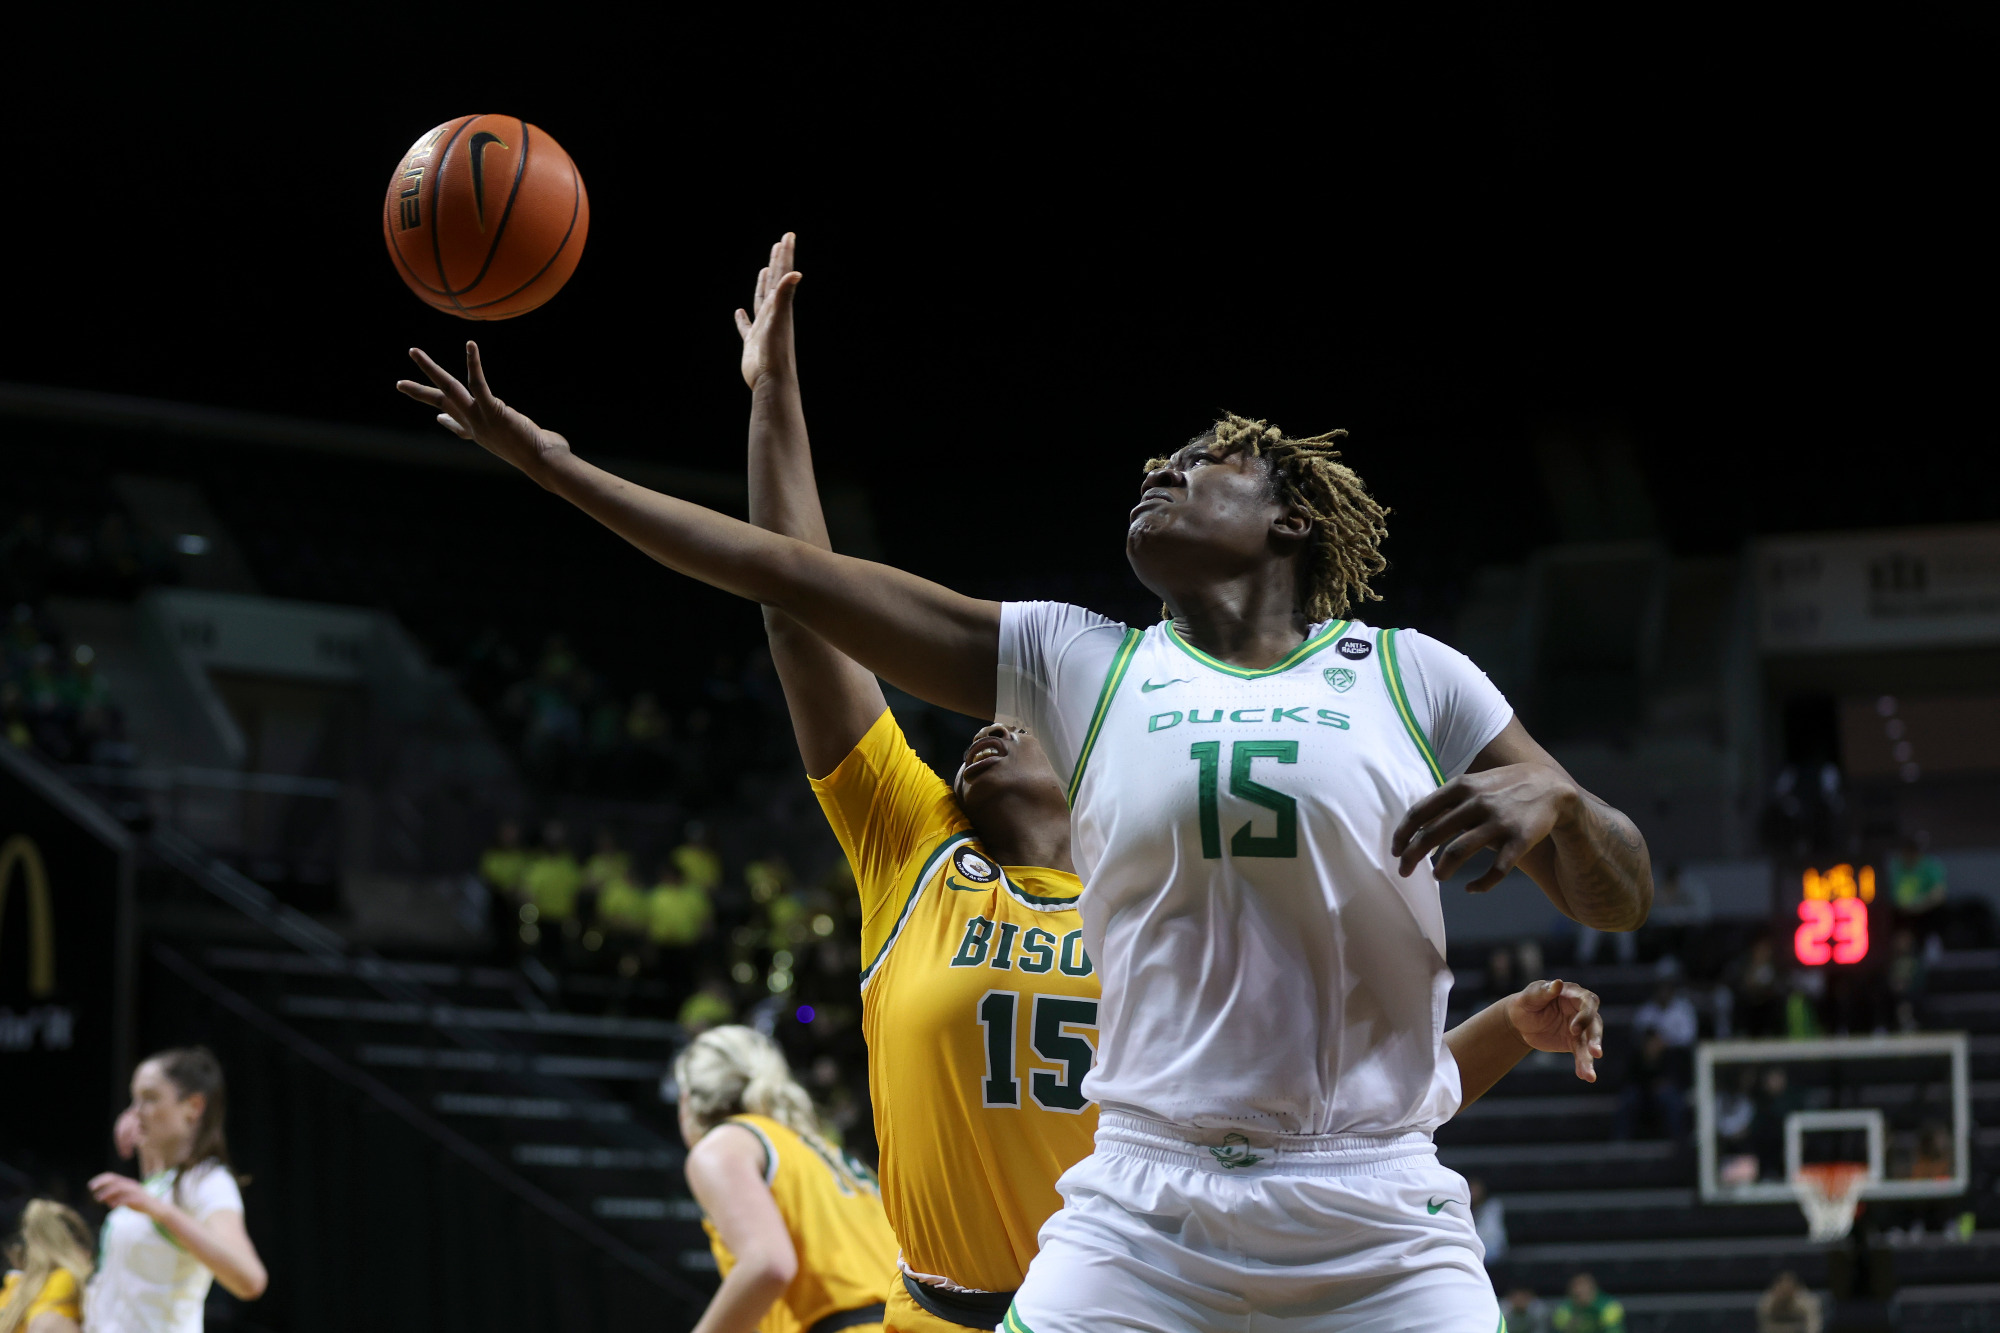 The Oregon Ducks take on the North Dakota State Bison in round one of the 2023 NIT Tournament at Matthew Knight Arena in Eugene, Oregon on March 17, 2023 (Eric Evans Photography)